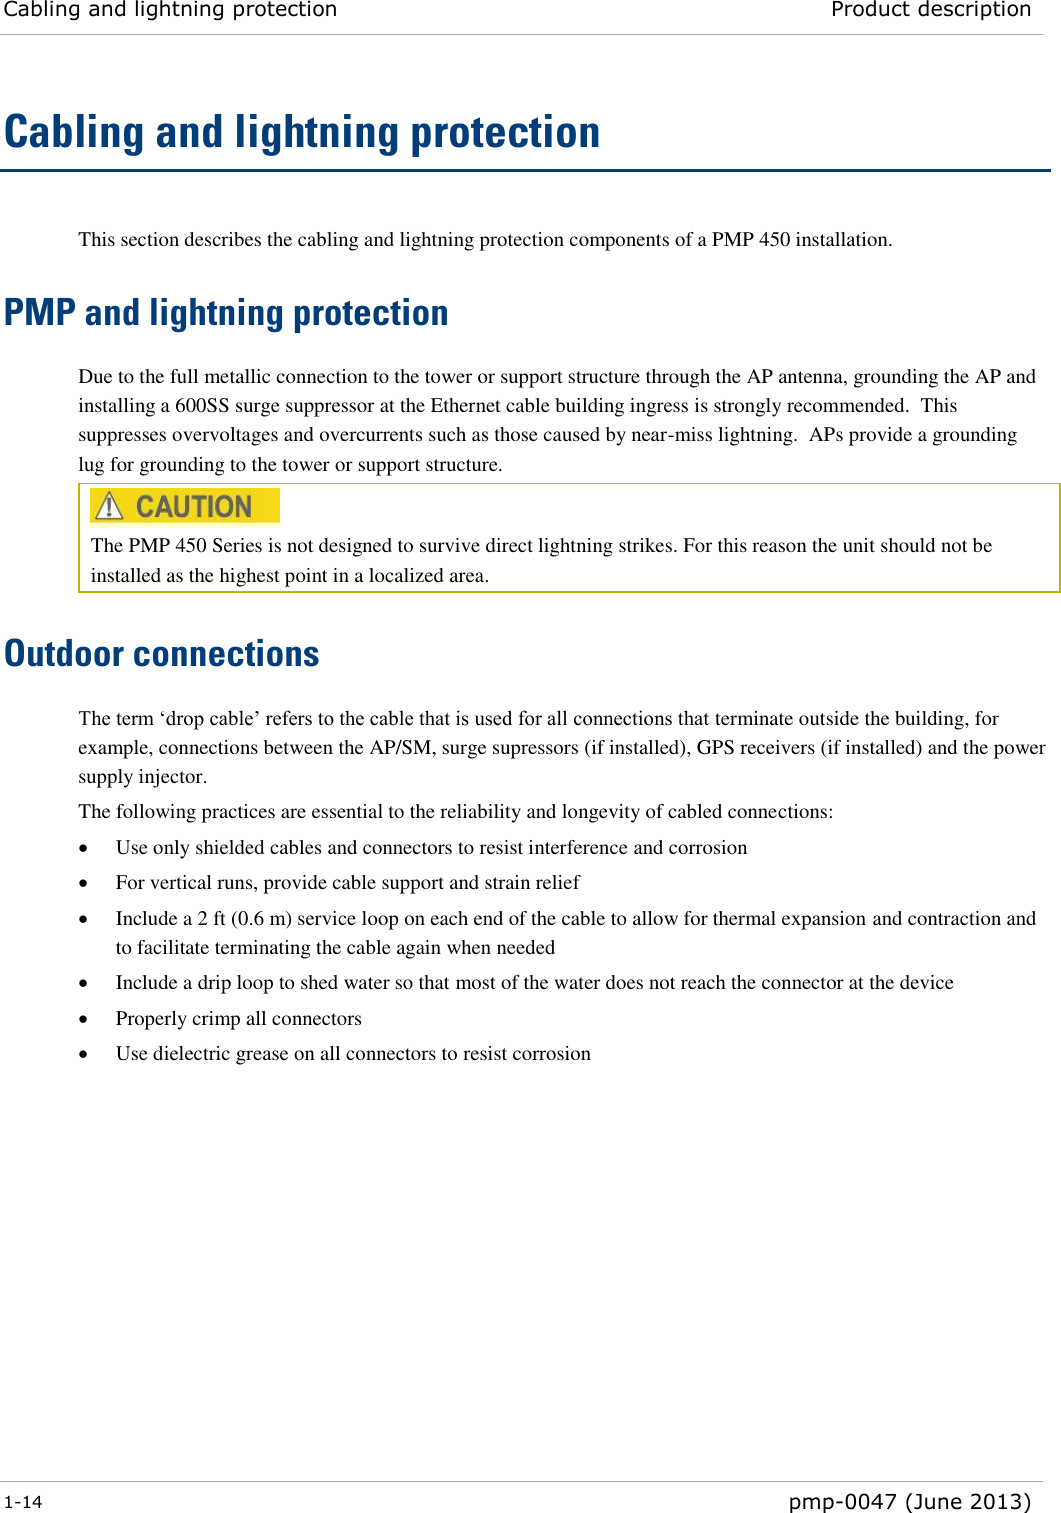 Cabling and lightning protection Product description  1-14  pmp-0047 (June 2013)  Cabling and lightning protection This section describes the cabling and lightning protection components of a PMP 450 installation. PMP and lightning protection Due to the full metallic connection to the tower or support structure through the AP antenna, grounding the AP and installing a 600SS surge suppressor at the Ethernet cable building ingress is strongly recommended.  This suppresses overvoltages and overcurrents such as those caused by near-miss lightning.  APs provide a grounding lug for grounding to the tower or support structure.  The PMP 450 Series is not designed to survive direct lightning strikes. For this reason the unit should not be installed as the highest point in a localized area. Outdoor connections The term ‘drop cable’ refers to the cable that is used for all connections that terminate outside the building, for example, connections between the AP/SM, surge supressors (if installed), GPS receivers (if installed) and the power supply injector. The following practices are essential to the reliability and longevity of cabled connections:  Use only shielded cables and connectors to resist interference and corrosion  For vertical runs, provide cable support and strain relief  Include a 2 ft (0.6 m) service loop on each end of the cable to allow for thermal expansion and contraction and to facilitate terminating the cable again when needed  Include a drip loop to shed water so that most of the water does not reach the connector at the device  Properly crimp all connectors  Use dielectric grease on all connectors to resist corrosion  